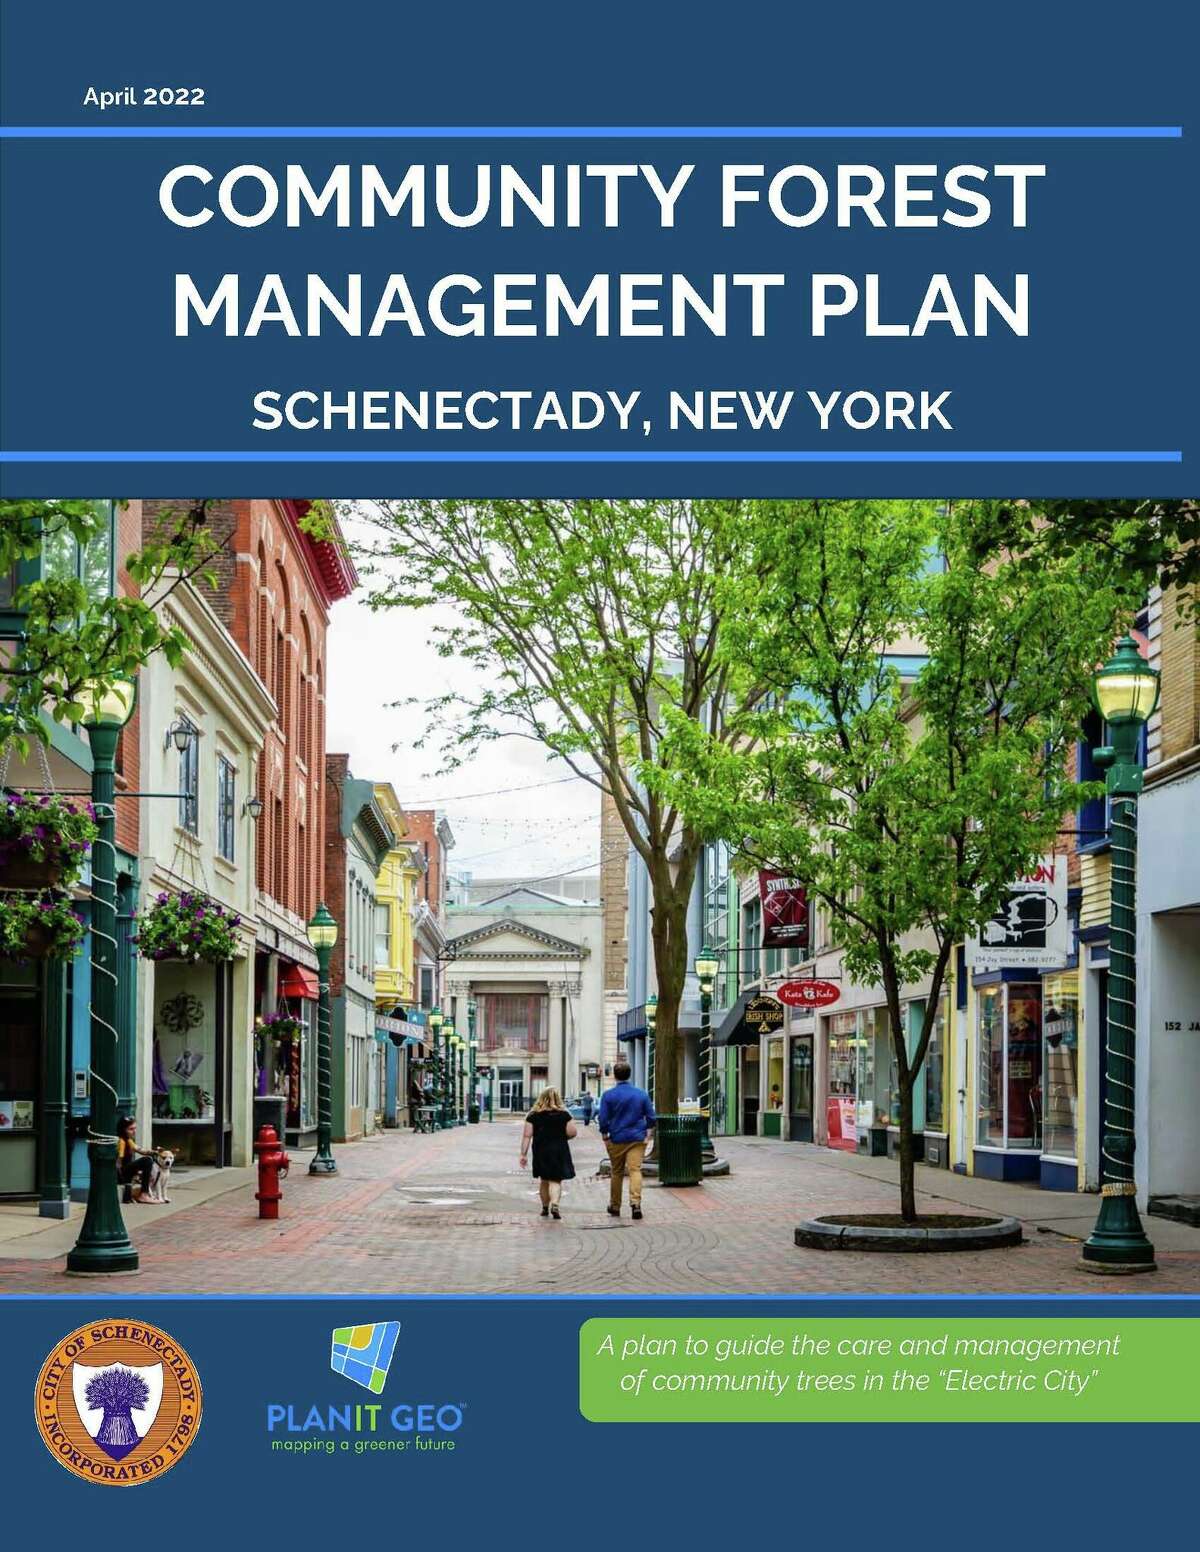 Mayor Gary McCarthy announced the city of Schenectady will host a public meeting on the draft Community Forest Management Plan.